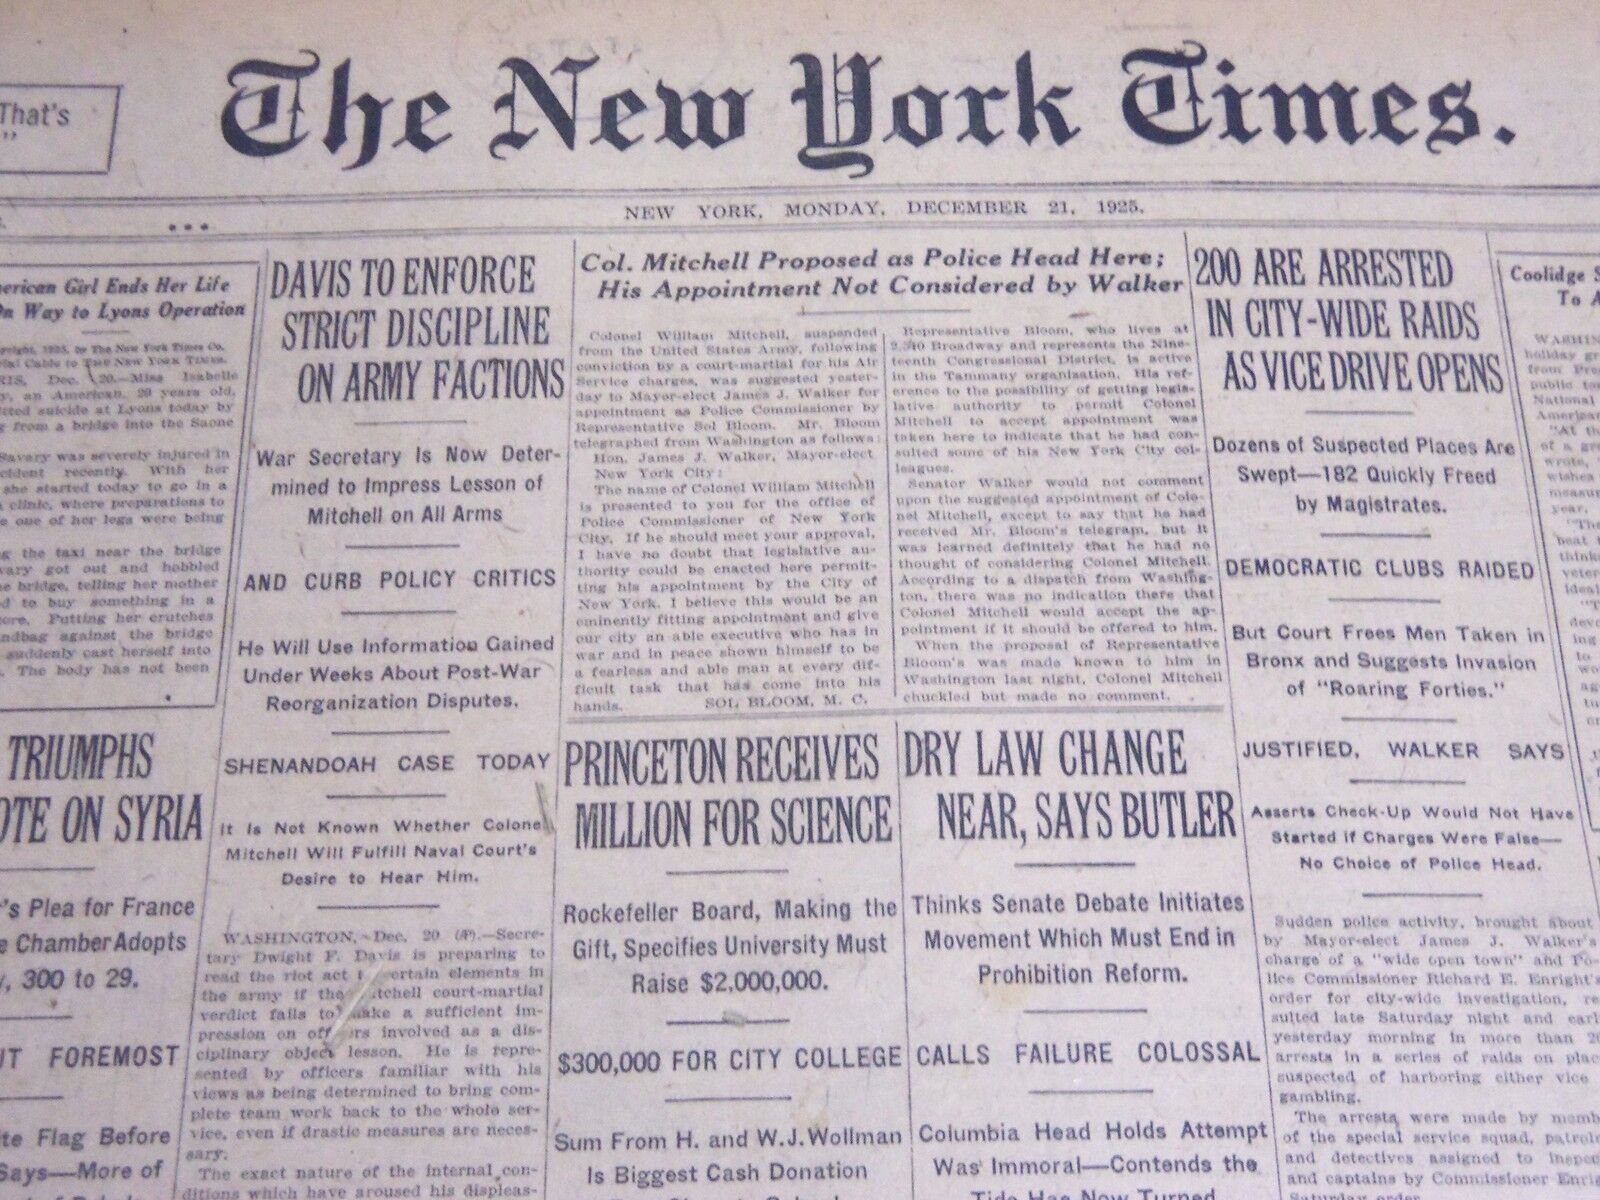 1925 DEC 21 NEW YORK TIMES - COL. MITCHELL PROPOSED AS POLICE HEAD HERE- NT 5402